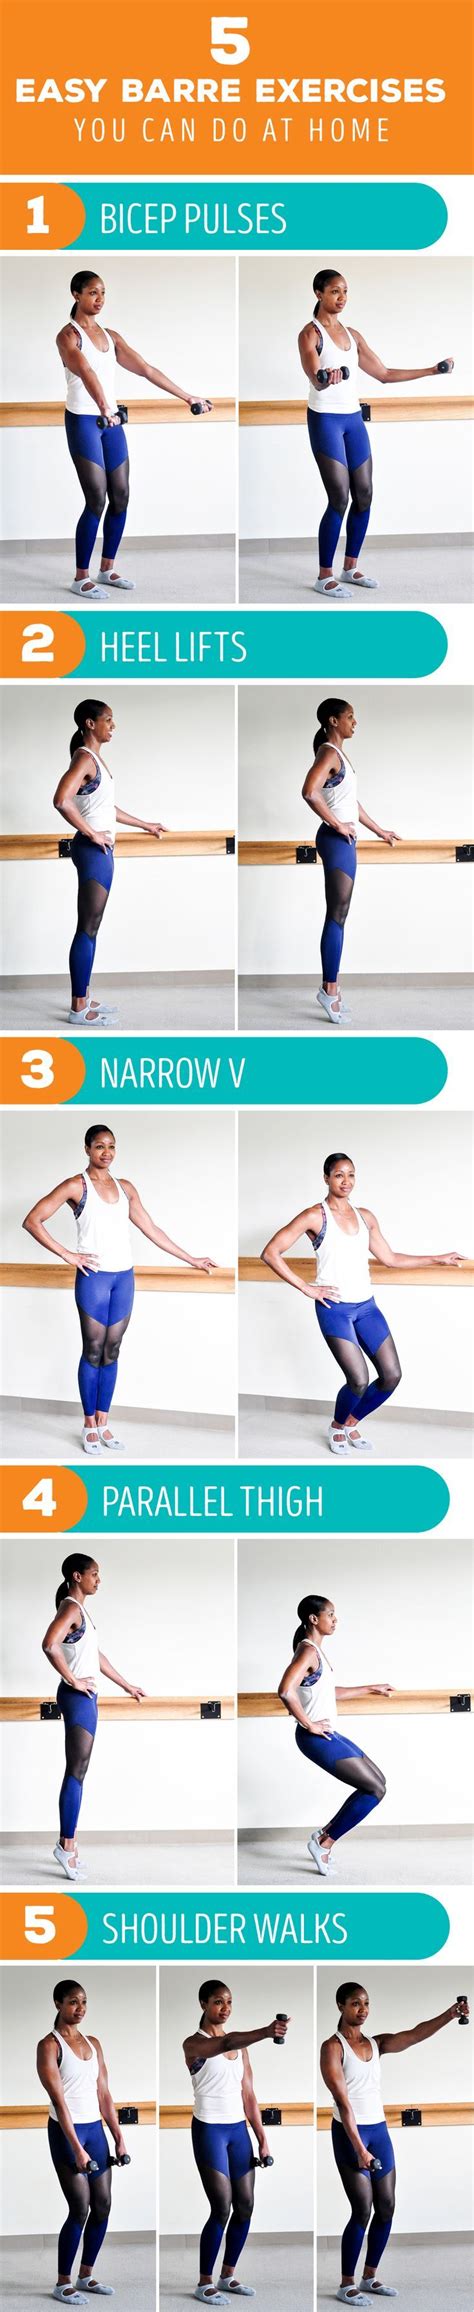 17 Best Images About Do Anywhere Workouts On Pinterest